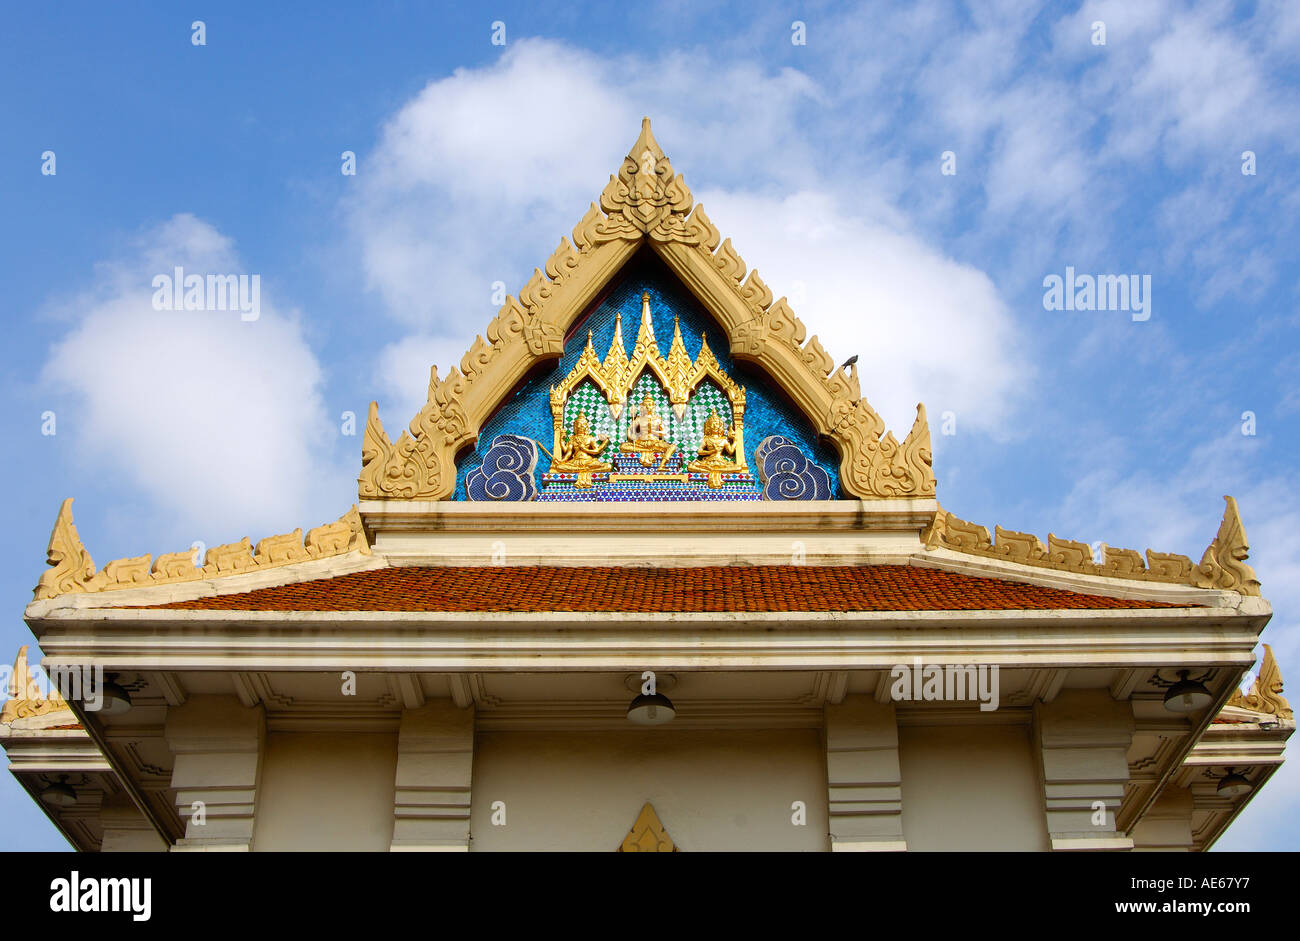 Decorated gable of a buddhist temple Wat Trimitr Temple Bangkok Thailand Stock Photo